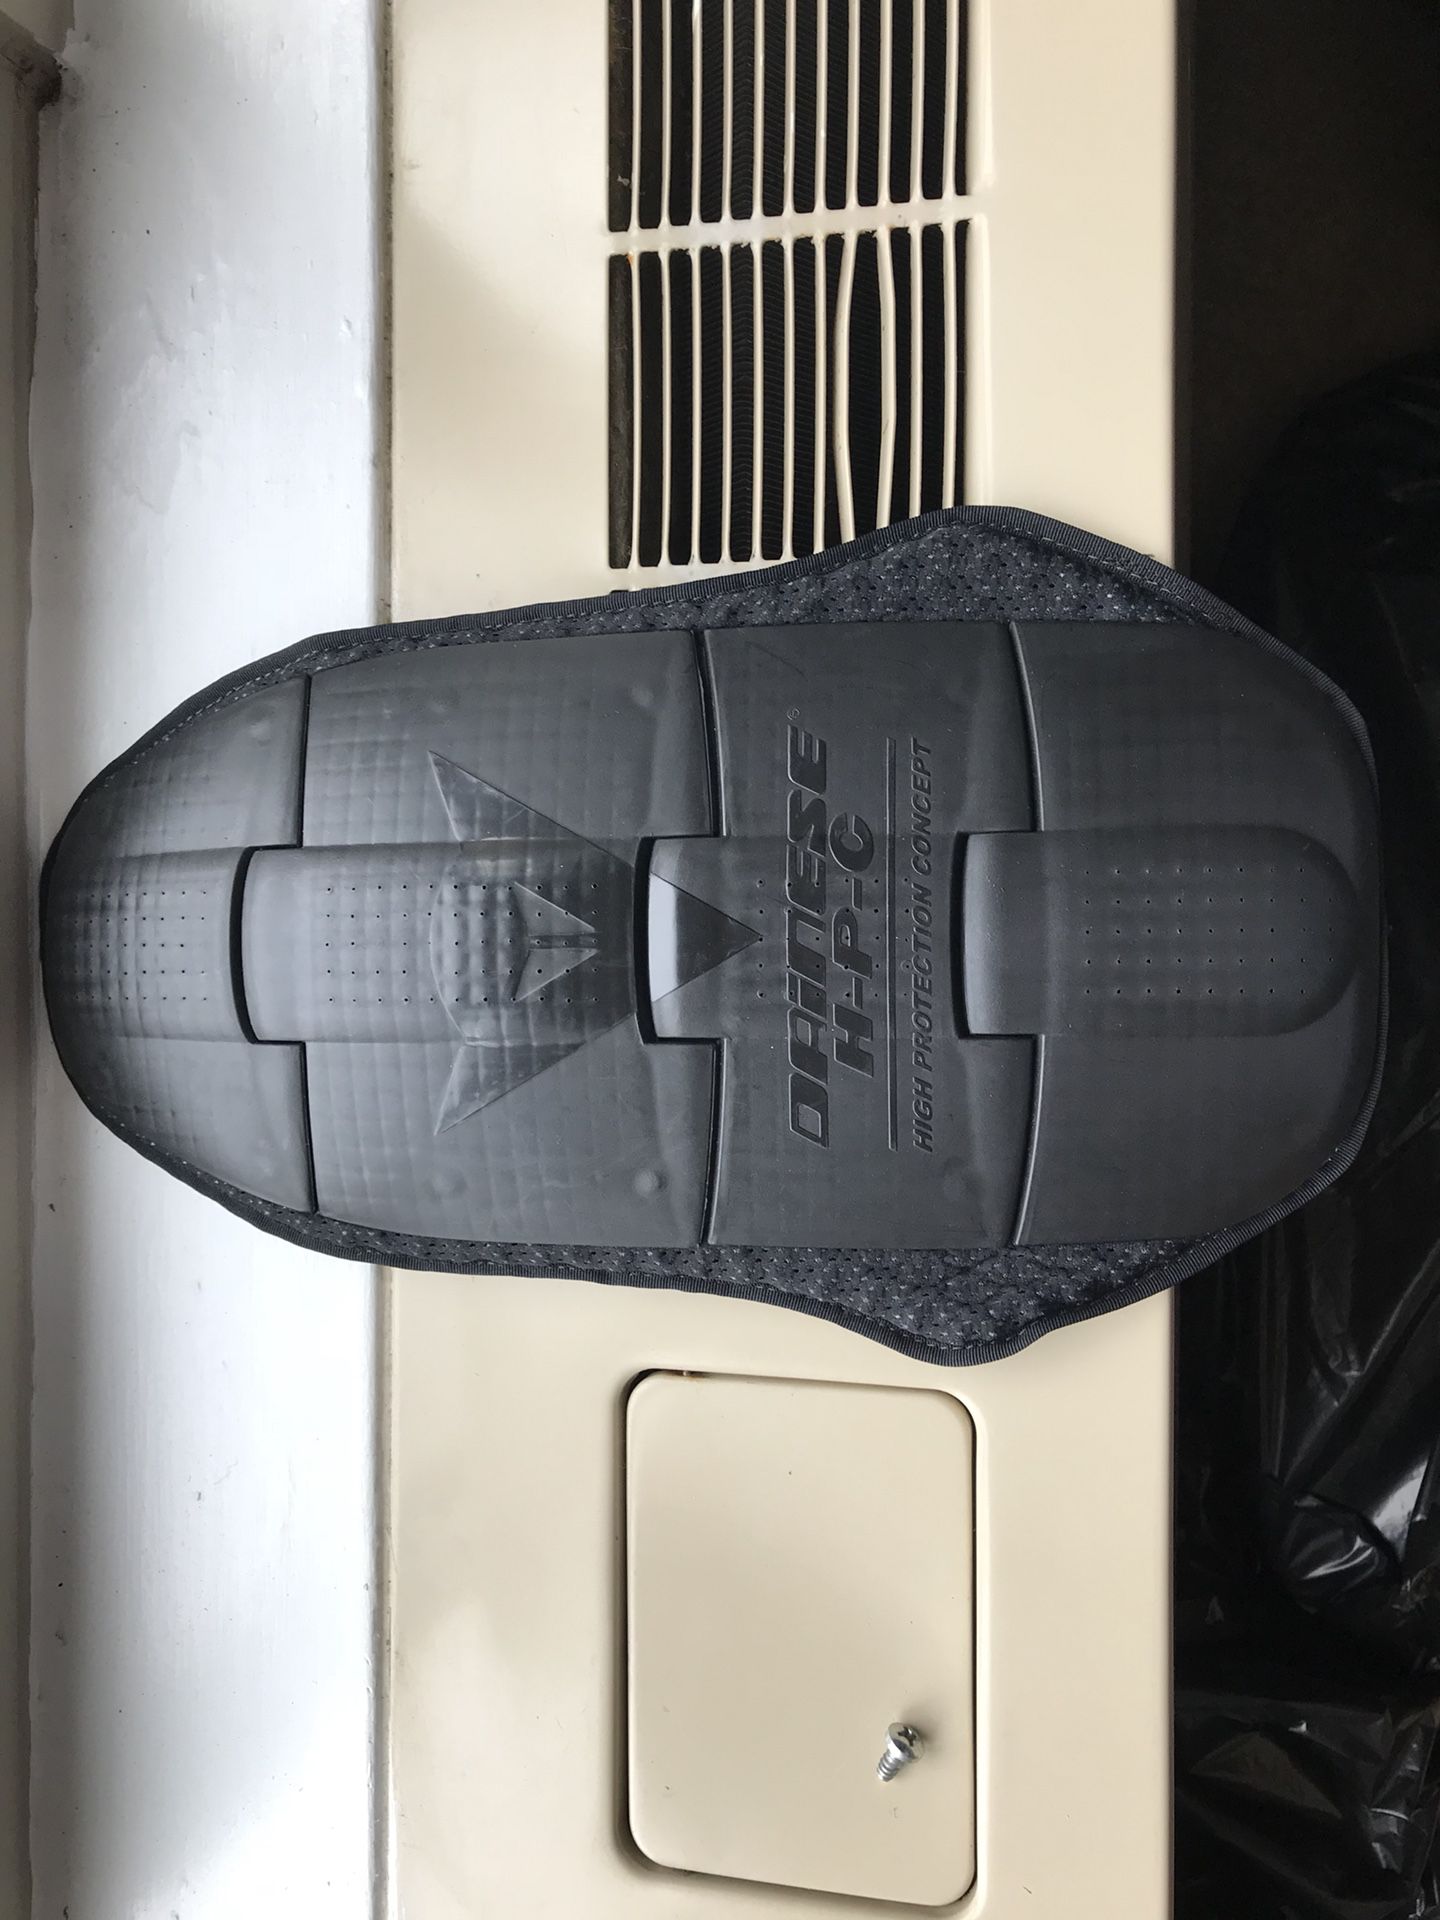 Dainese G2 Back Protector for $35 or Best Offer